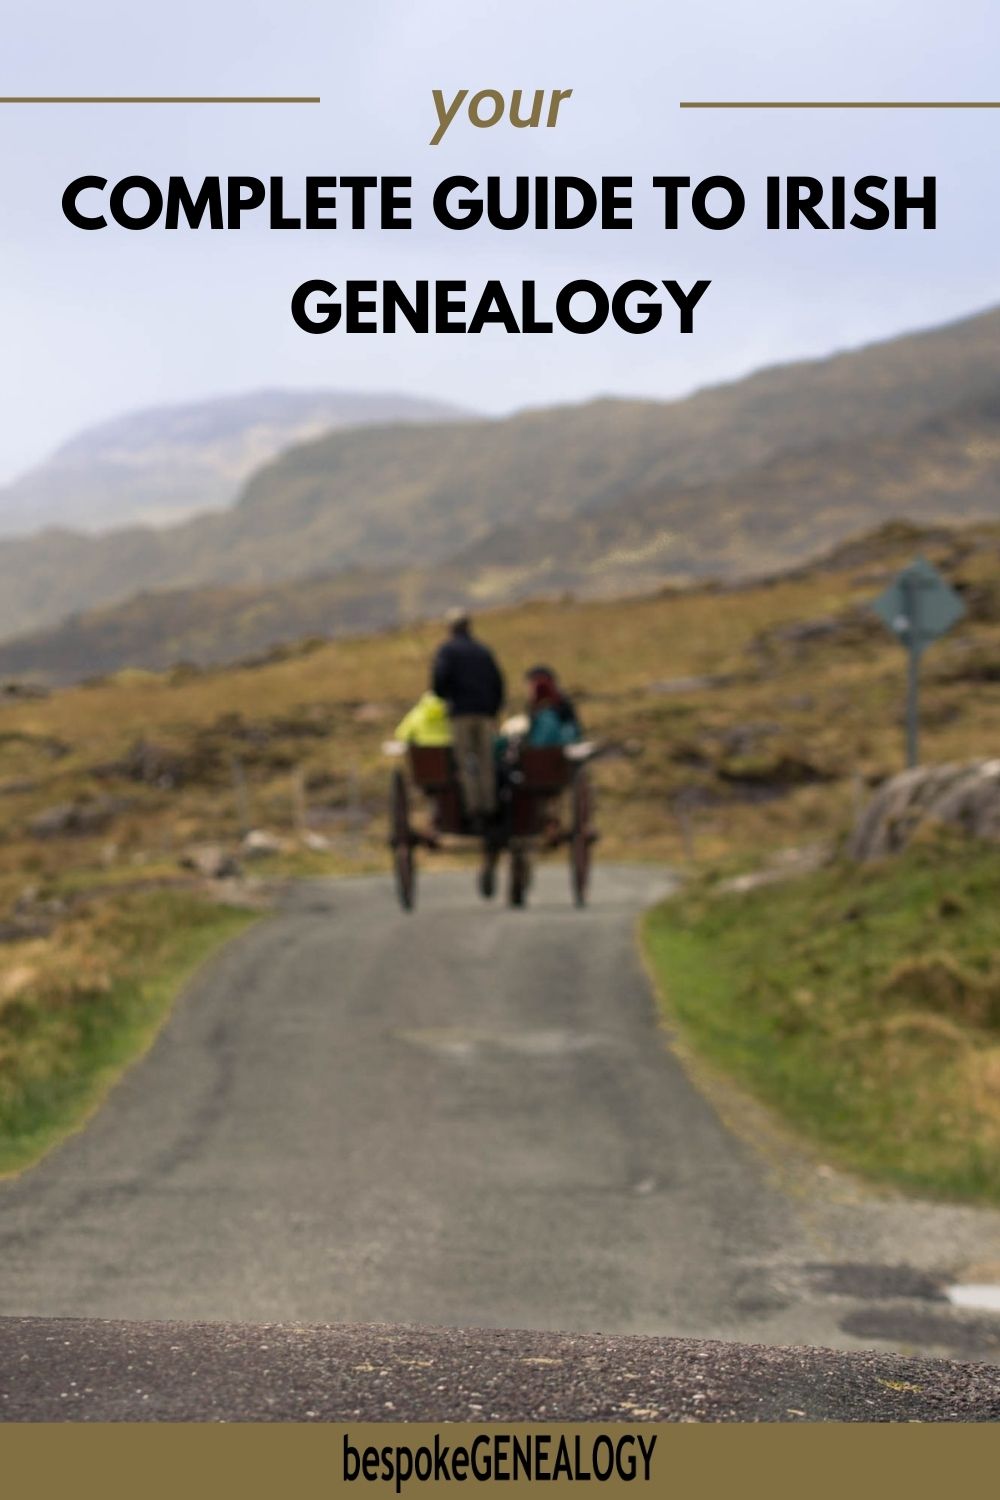 Your complete guide to Irish genealogy. Photo is an out of focus shot of two people on a pony and trap on a rural road in the Irish countryside.